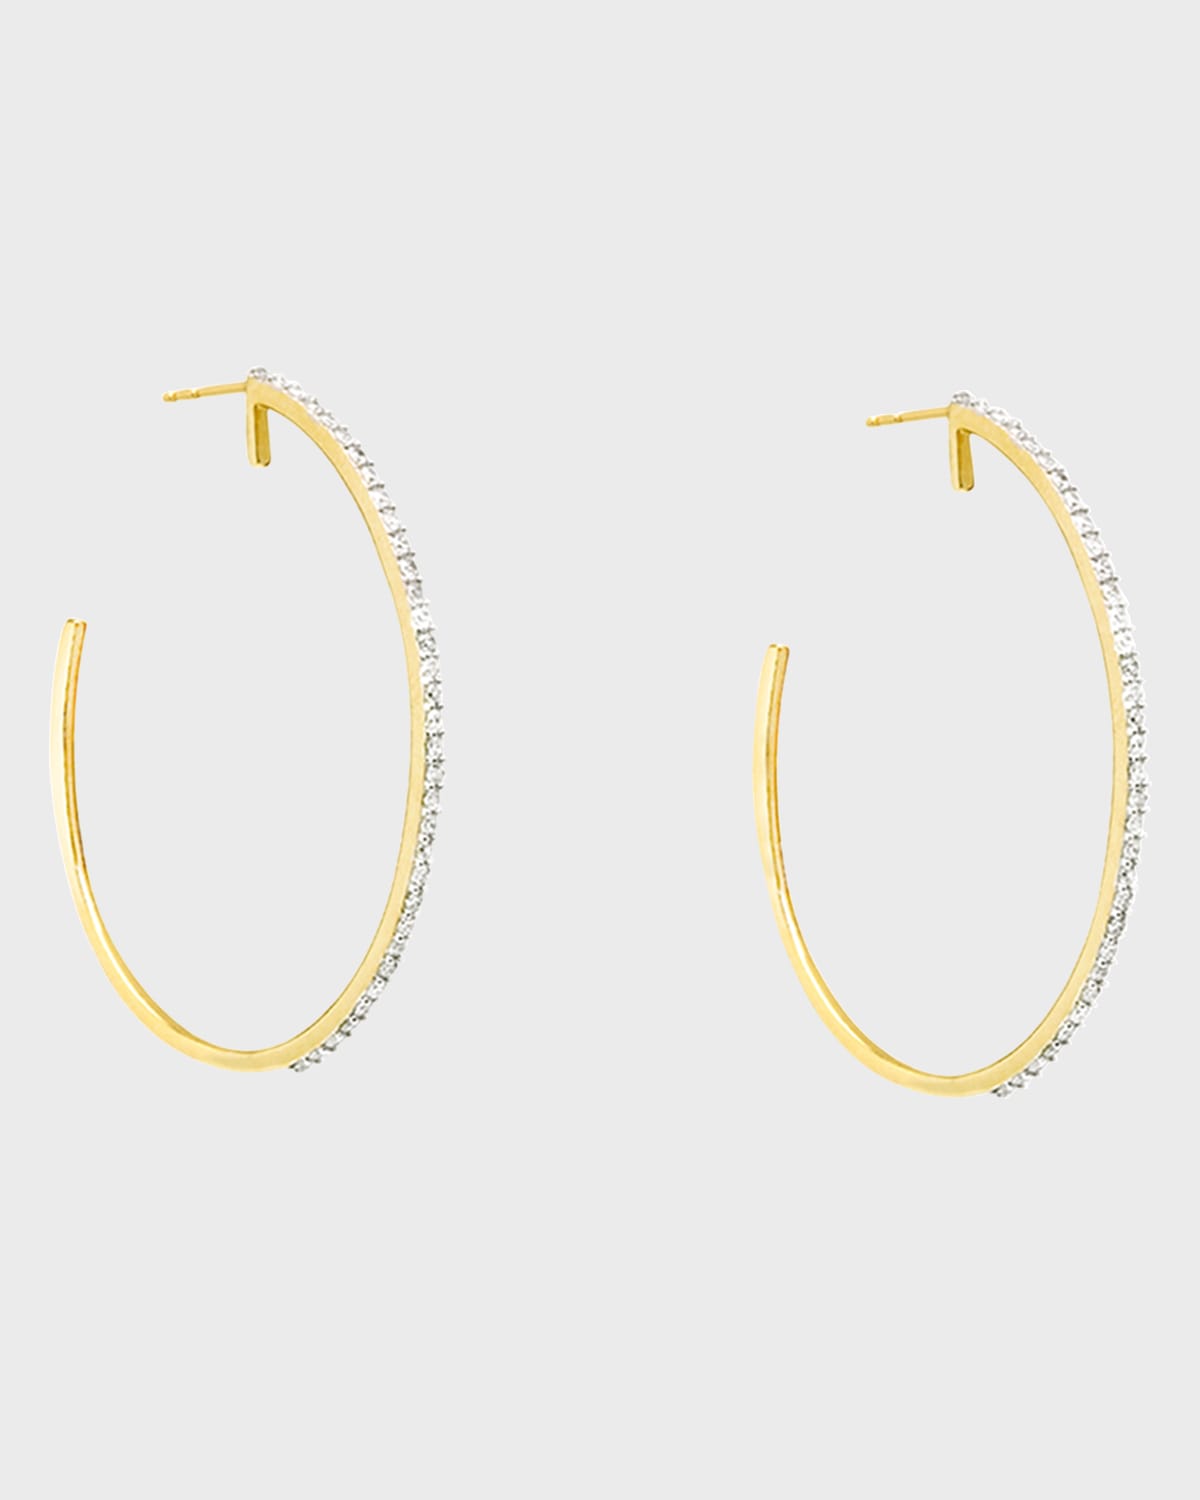 STONE AND STRAND XL PAVE HOOP EARRINGS,PROD246030004